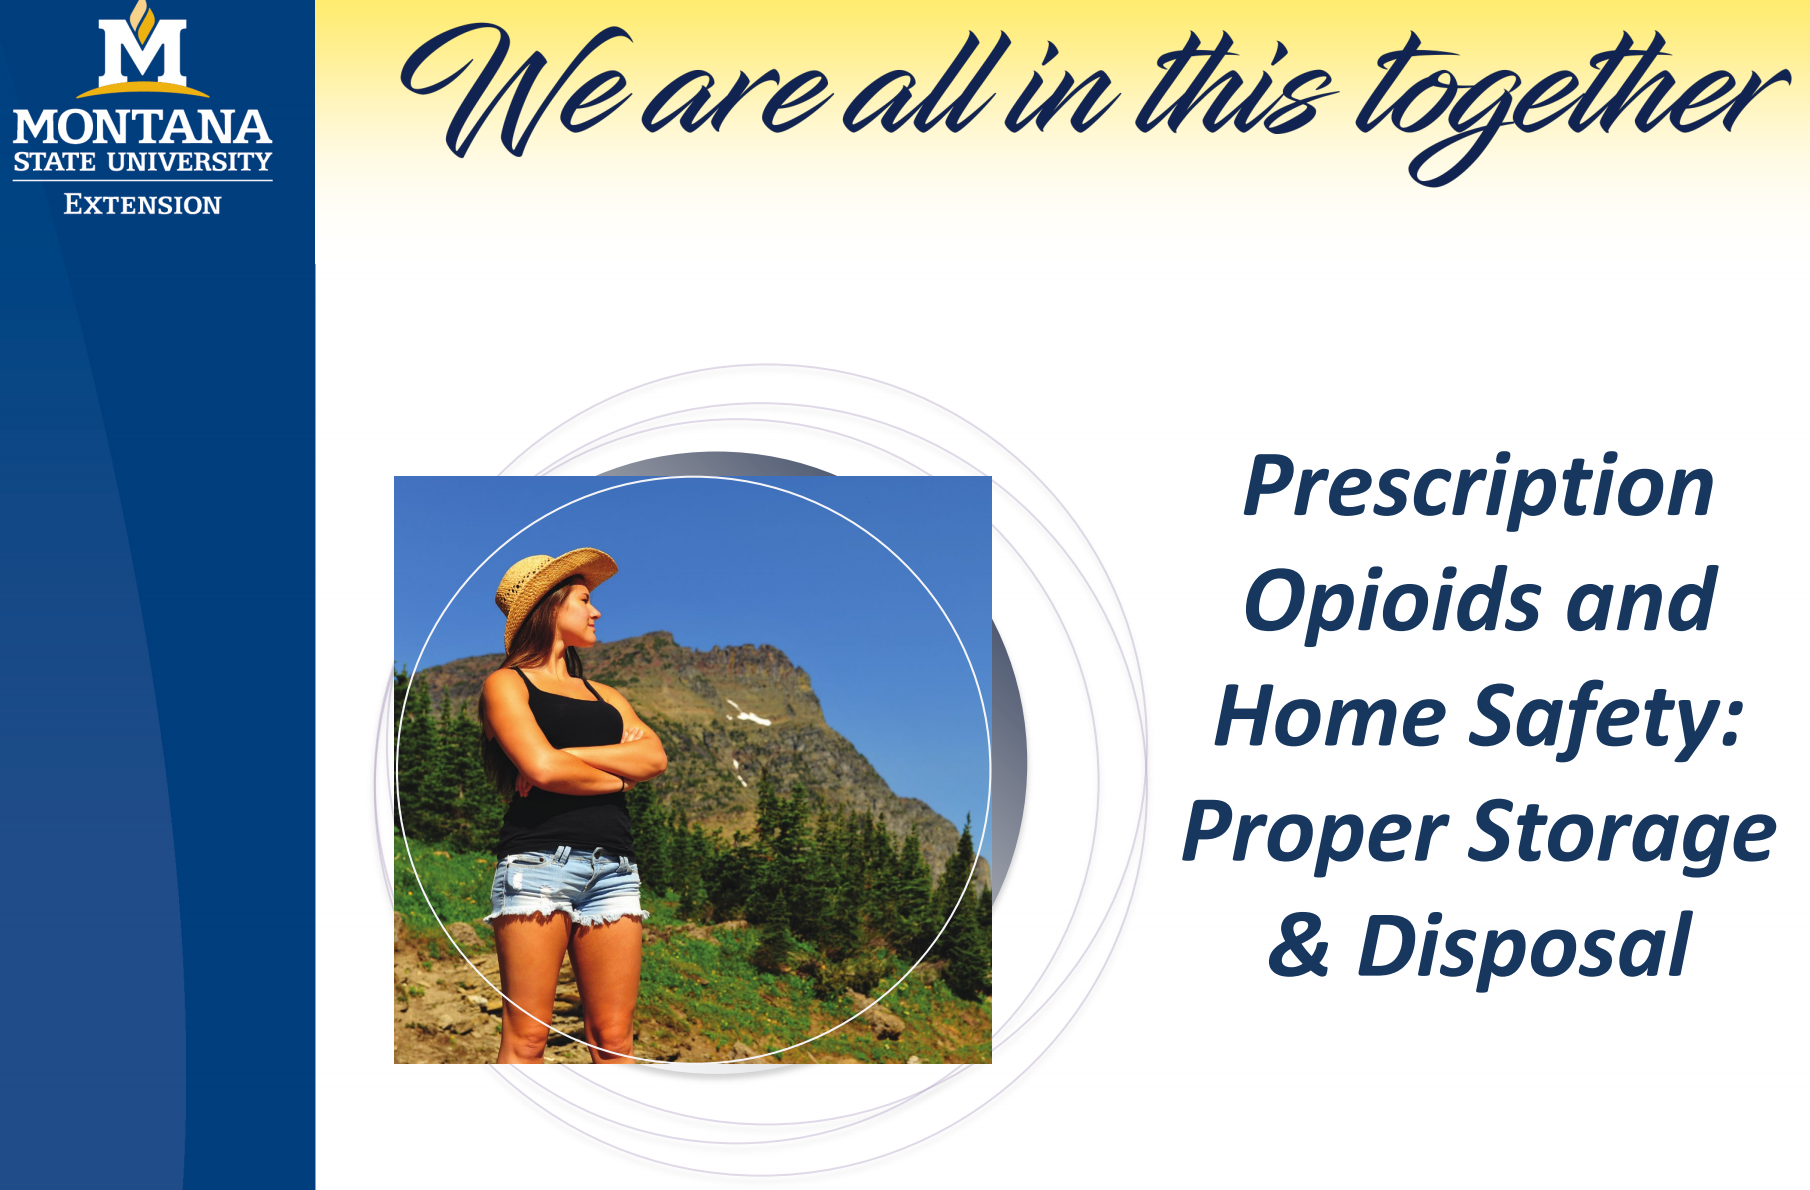 Prescription opioids and home safety